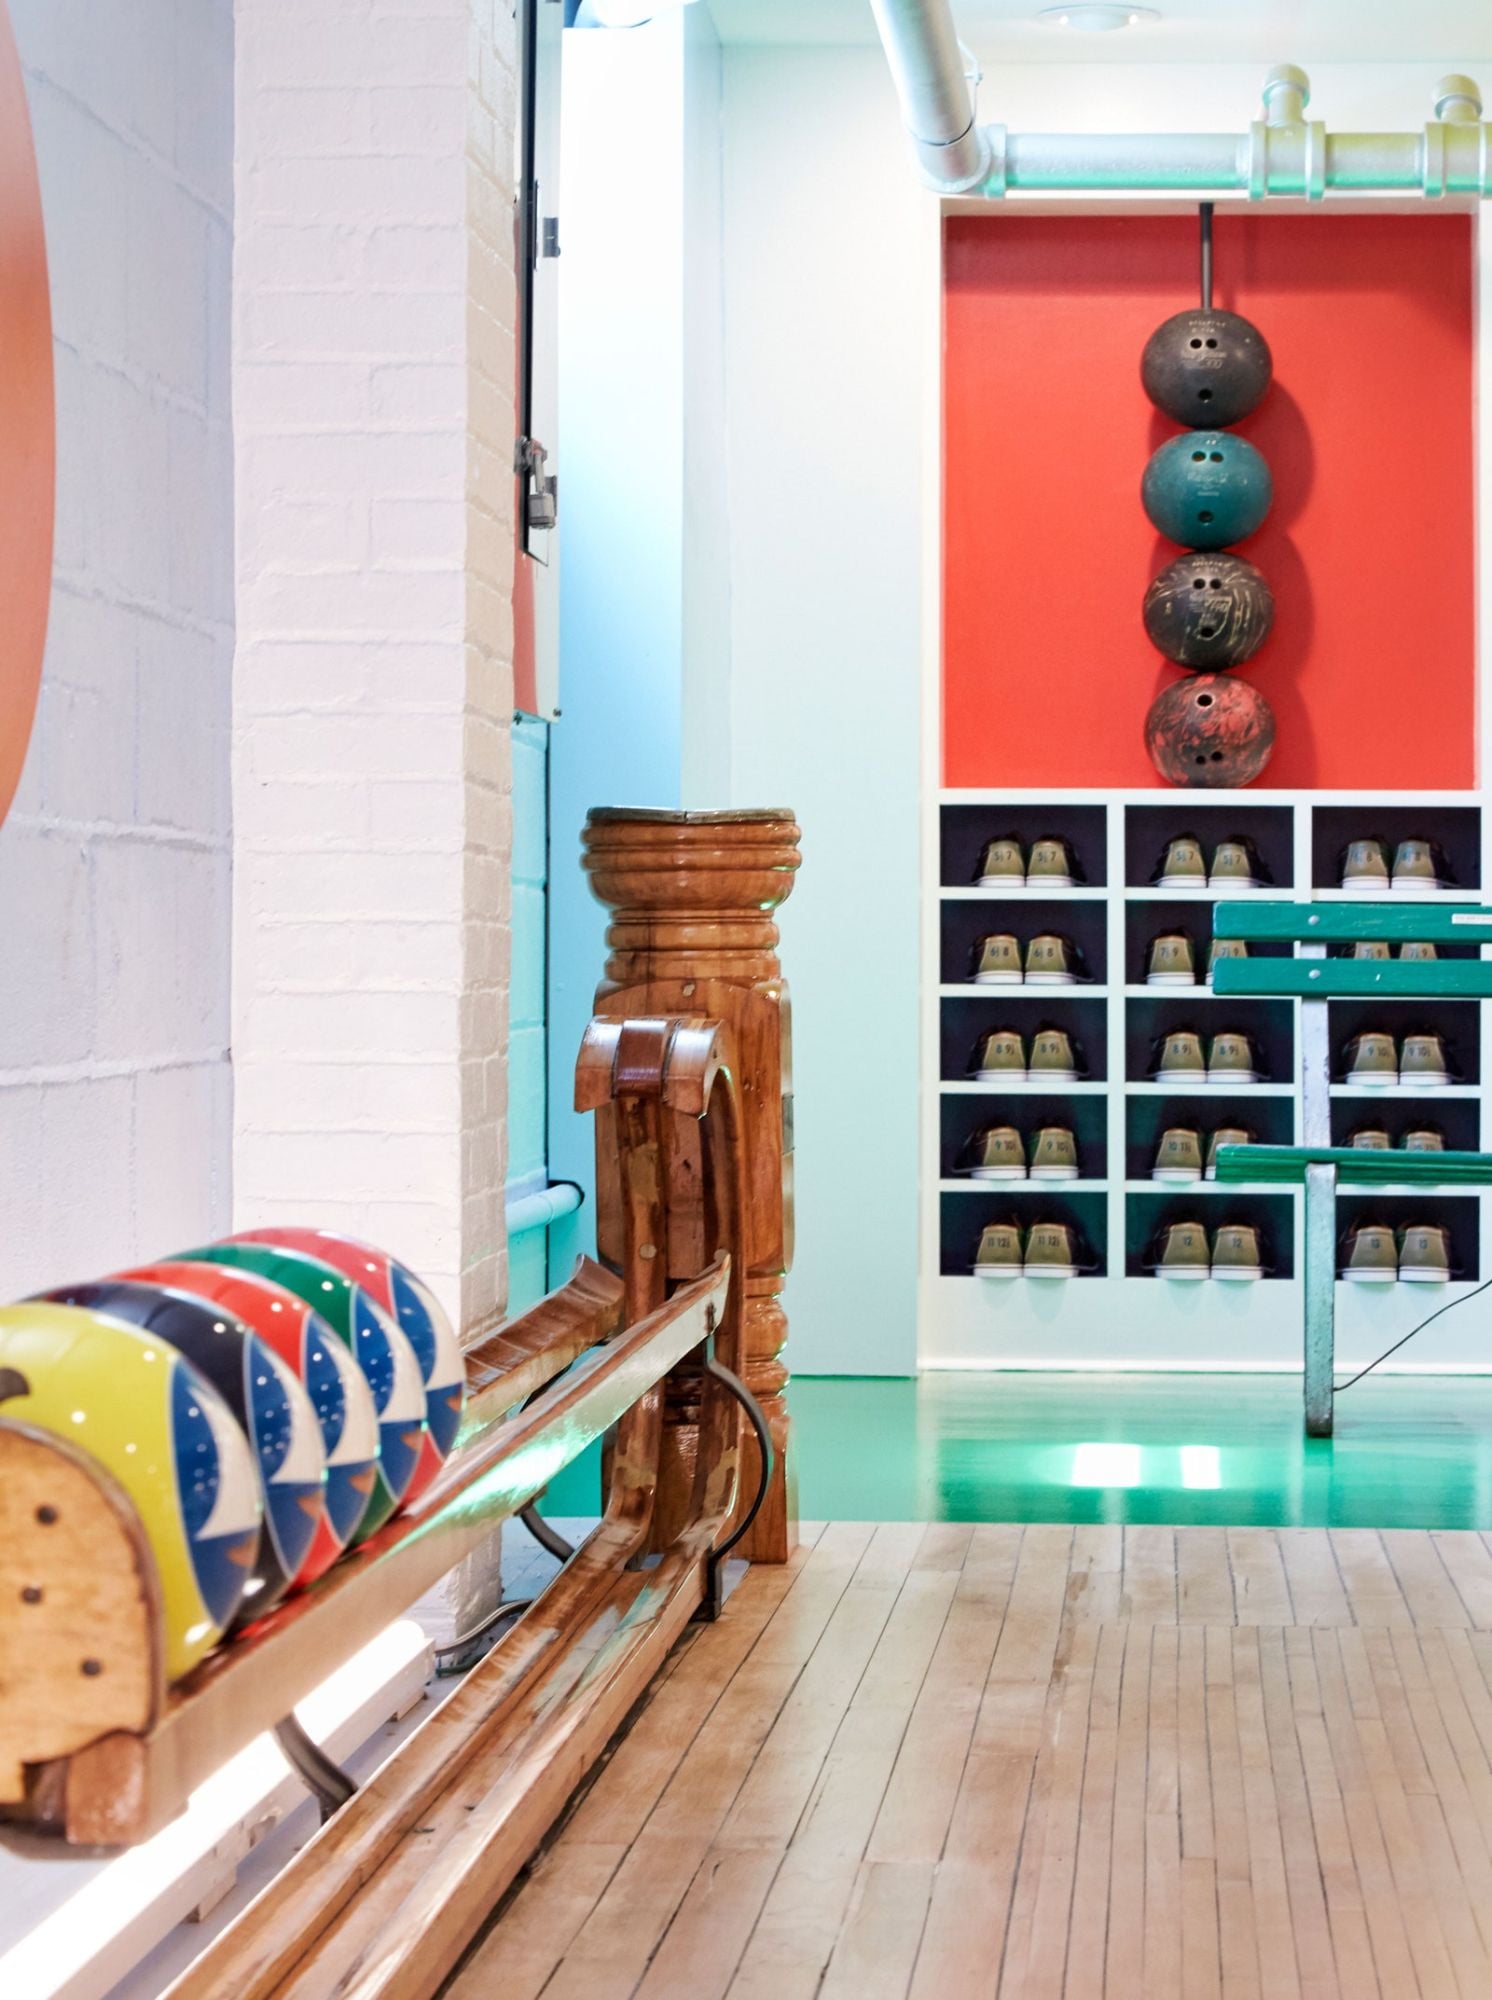 Colorful bowling balls and sleek wooden rails grace the lanes of the renovated Bellport Bowling Alley.